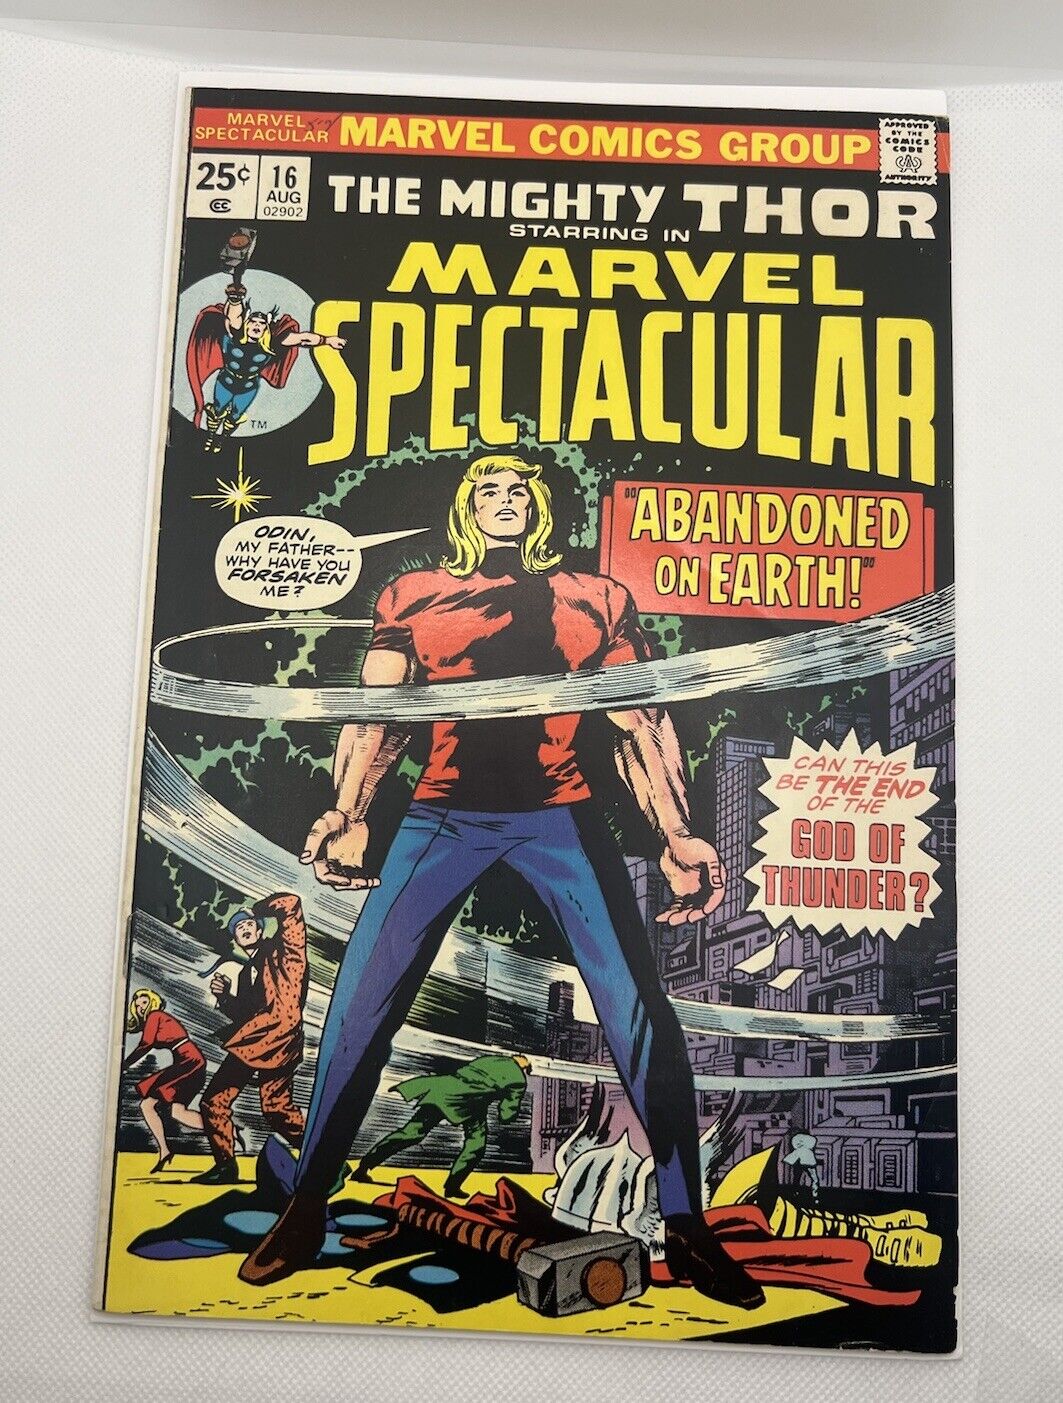 1975 THE MIGHTY THOR MARVEL SPECTACULAR #16 Marvel Comic 